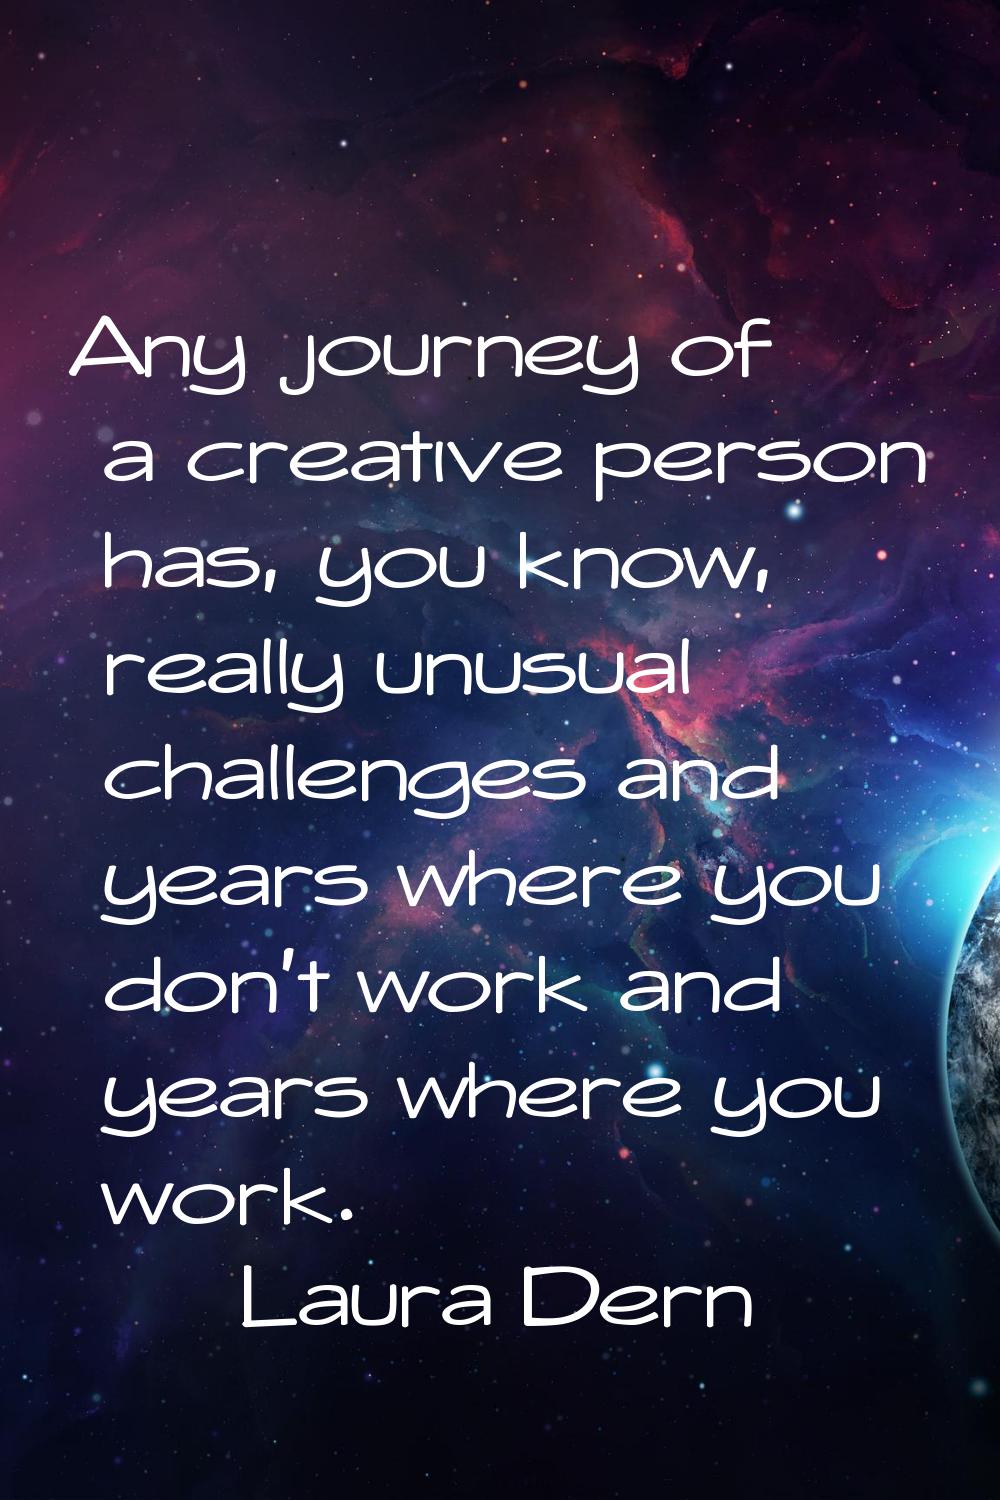 Any journey of a creative person has, you know, really unusual challenges and years where you don't